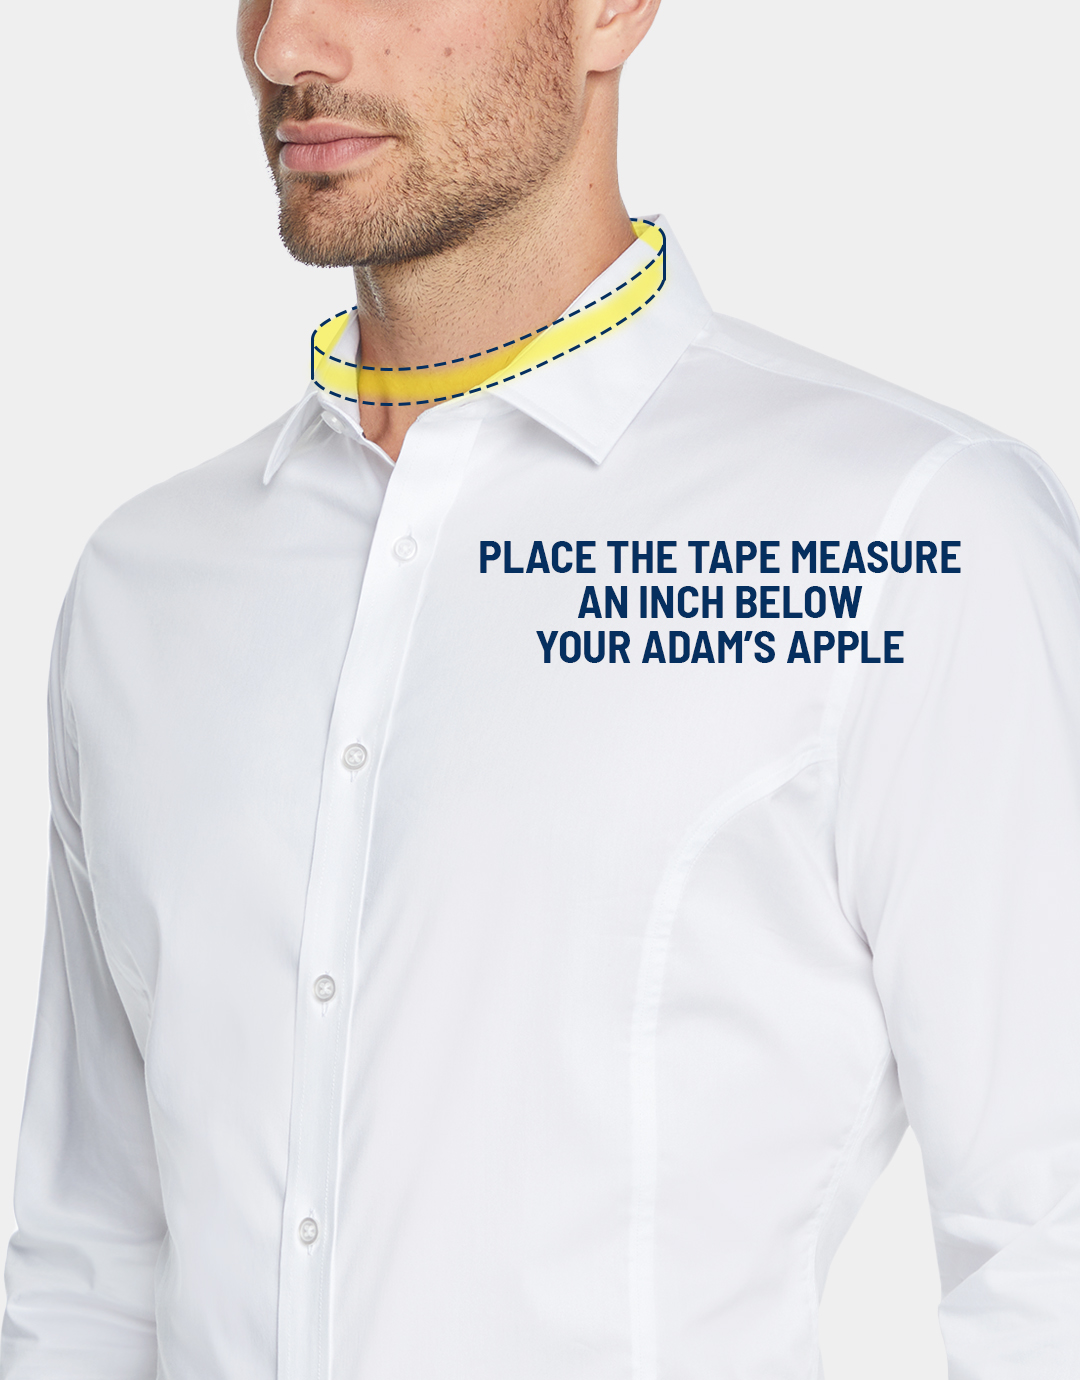 How to measure dress shirt's neck size